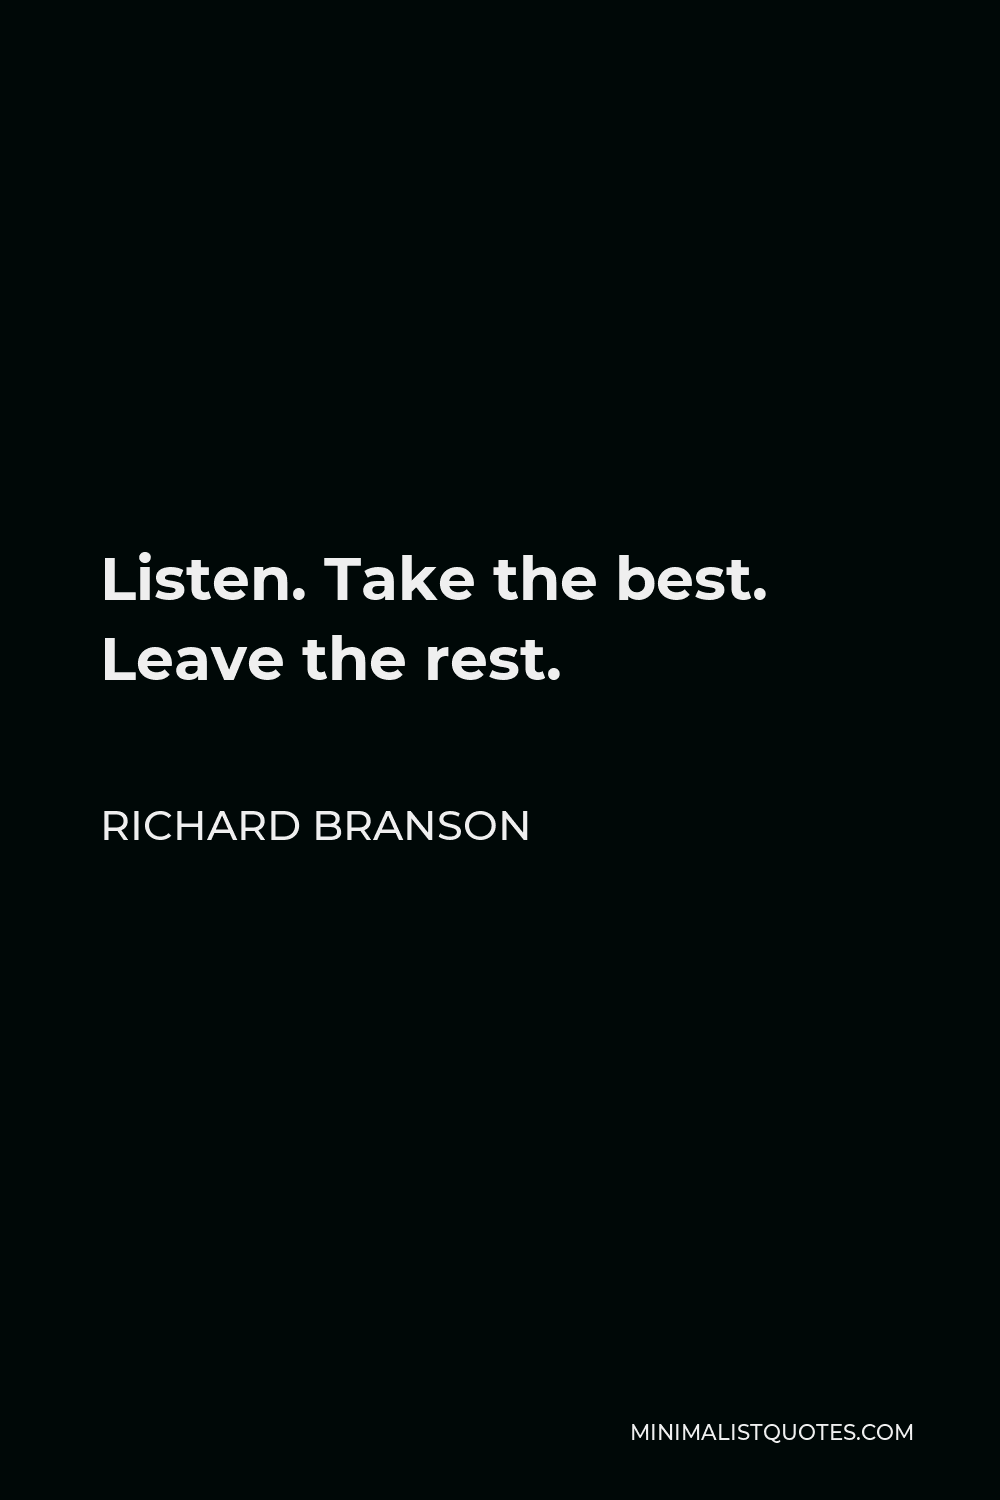 Richard Branson Quote - Listen. Take the best. Leave the rest.